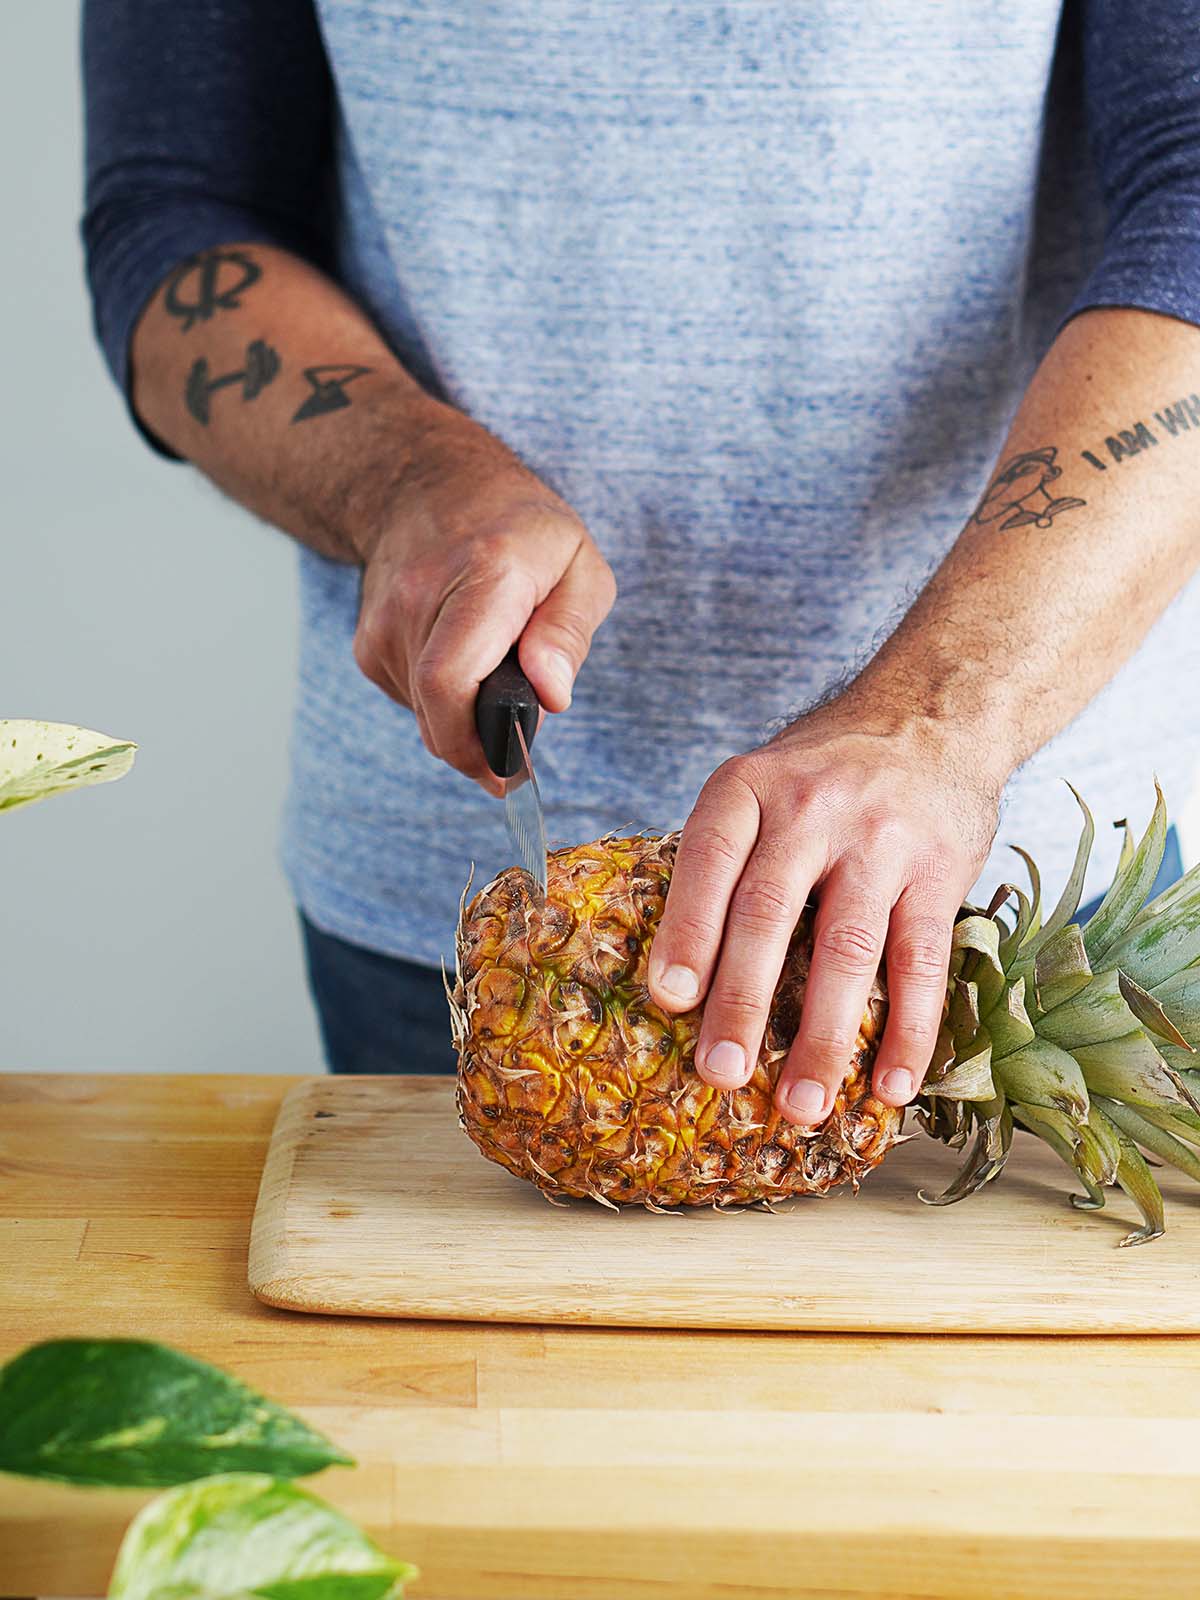 A man showing how to slice a pineapple with a knife on a cutting board.